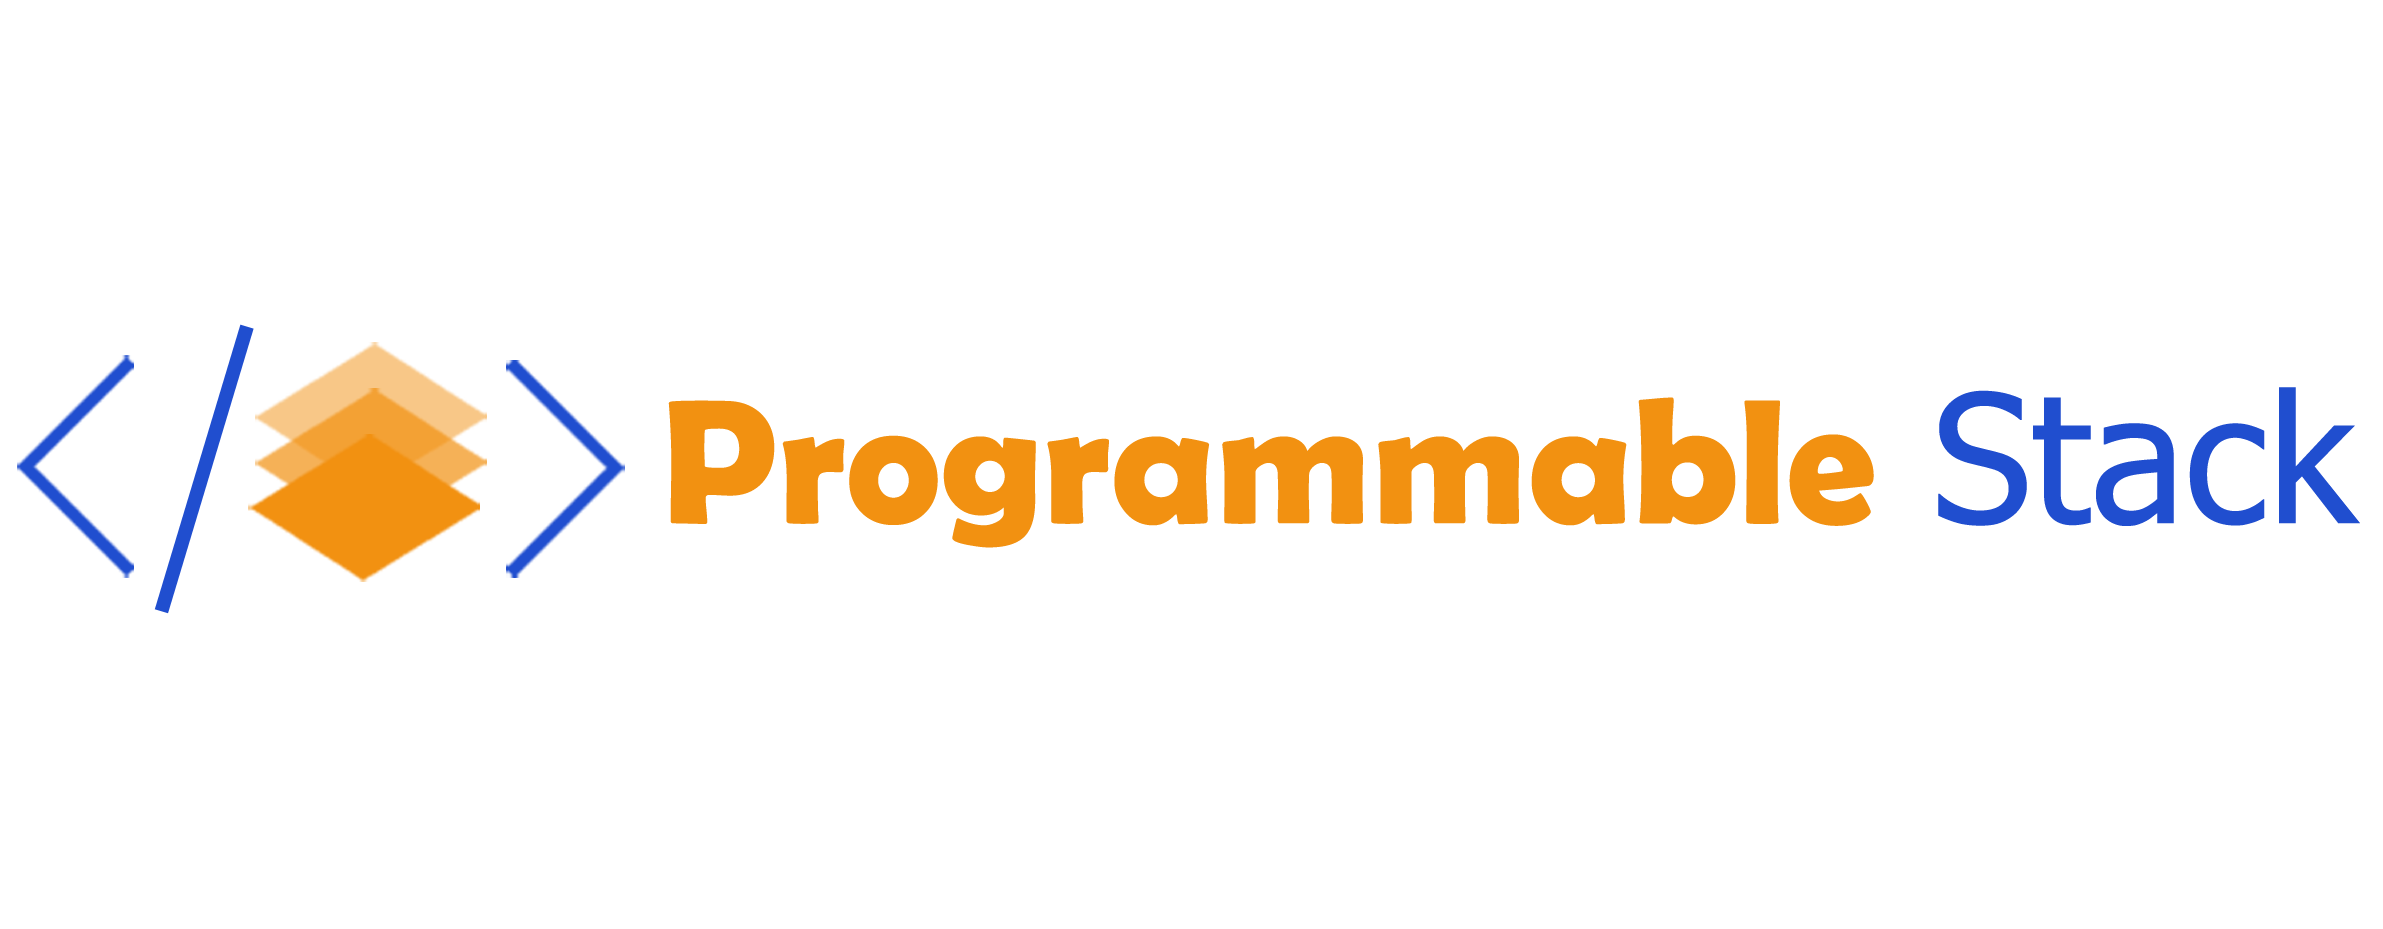 Programmable Stack